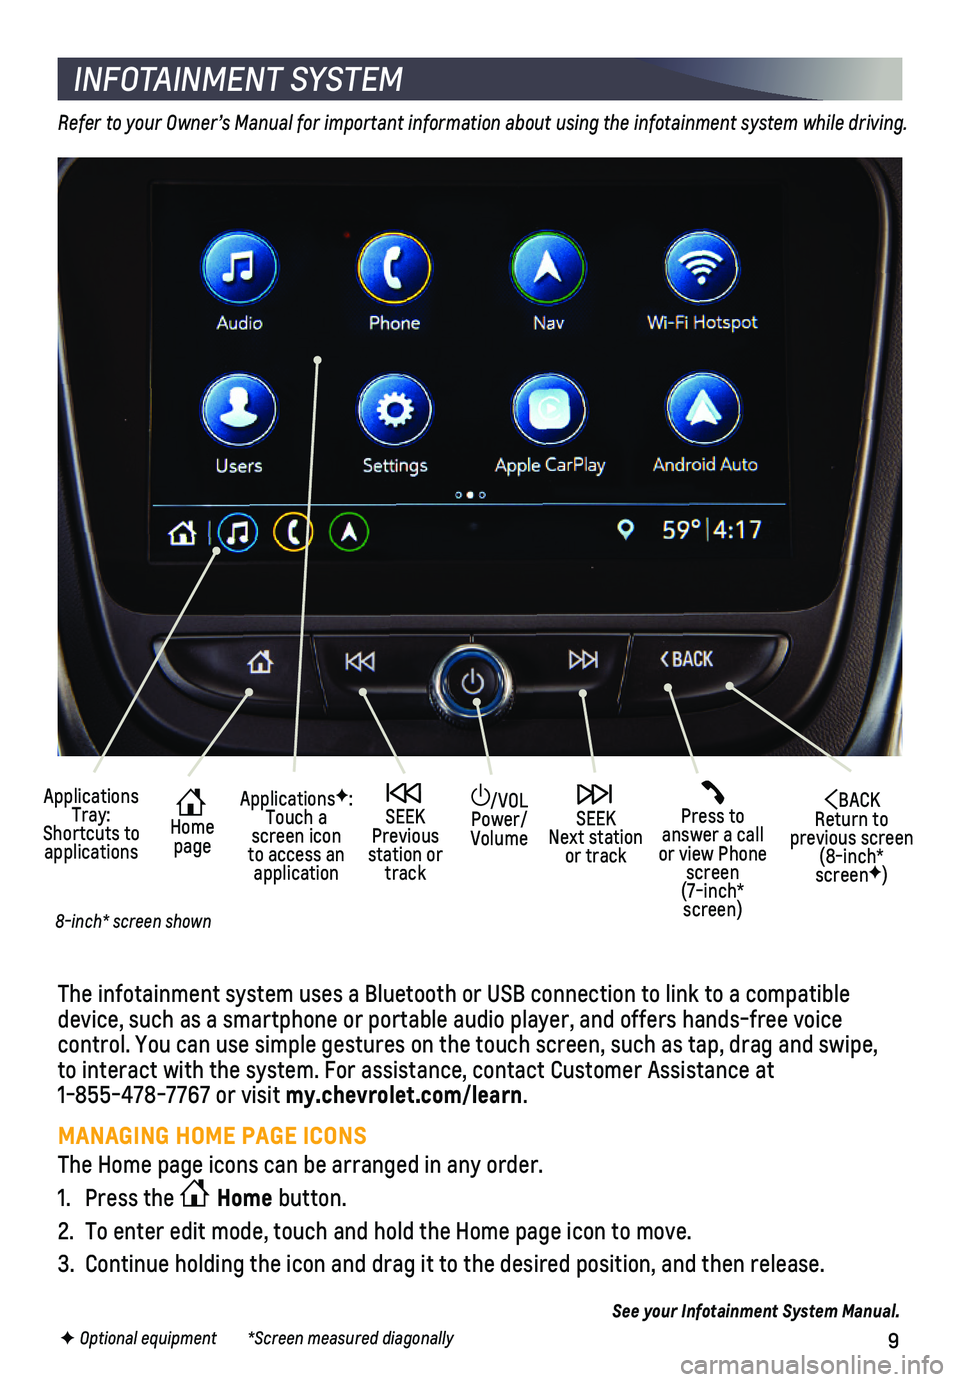 CHEVROLET EQUINOX 2020  Get To Know Guide 9F Optional equipment        *Screen measured diagonally
INFOTAINMENT SYSTEM
Refer to your Owner’s Manual for important information about using the infotainment system while driving.
The infotainmen